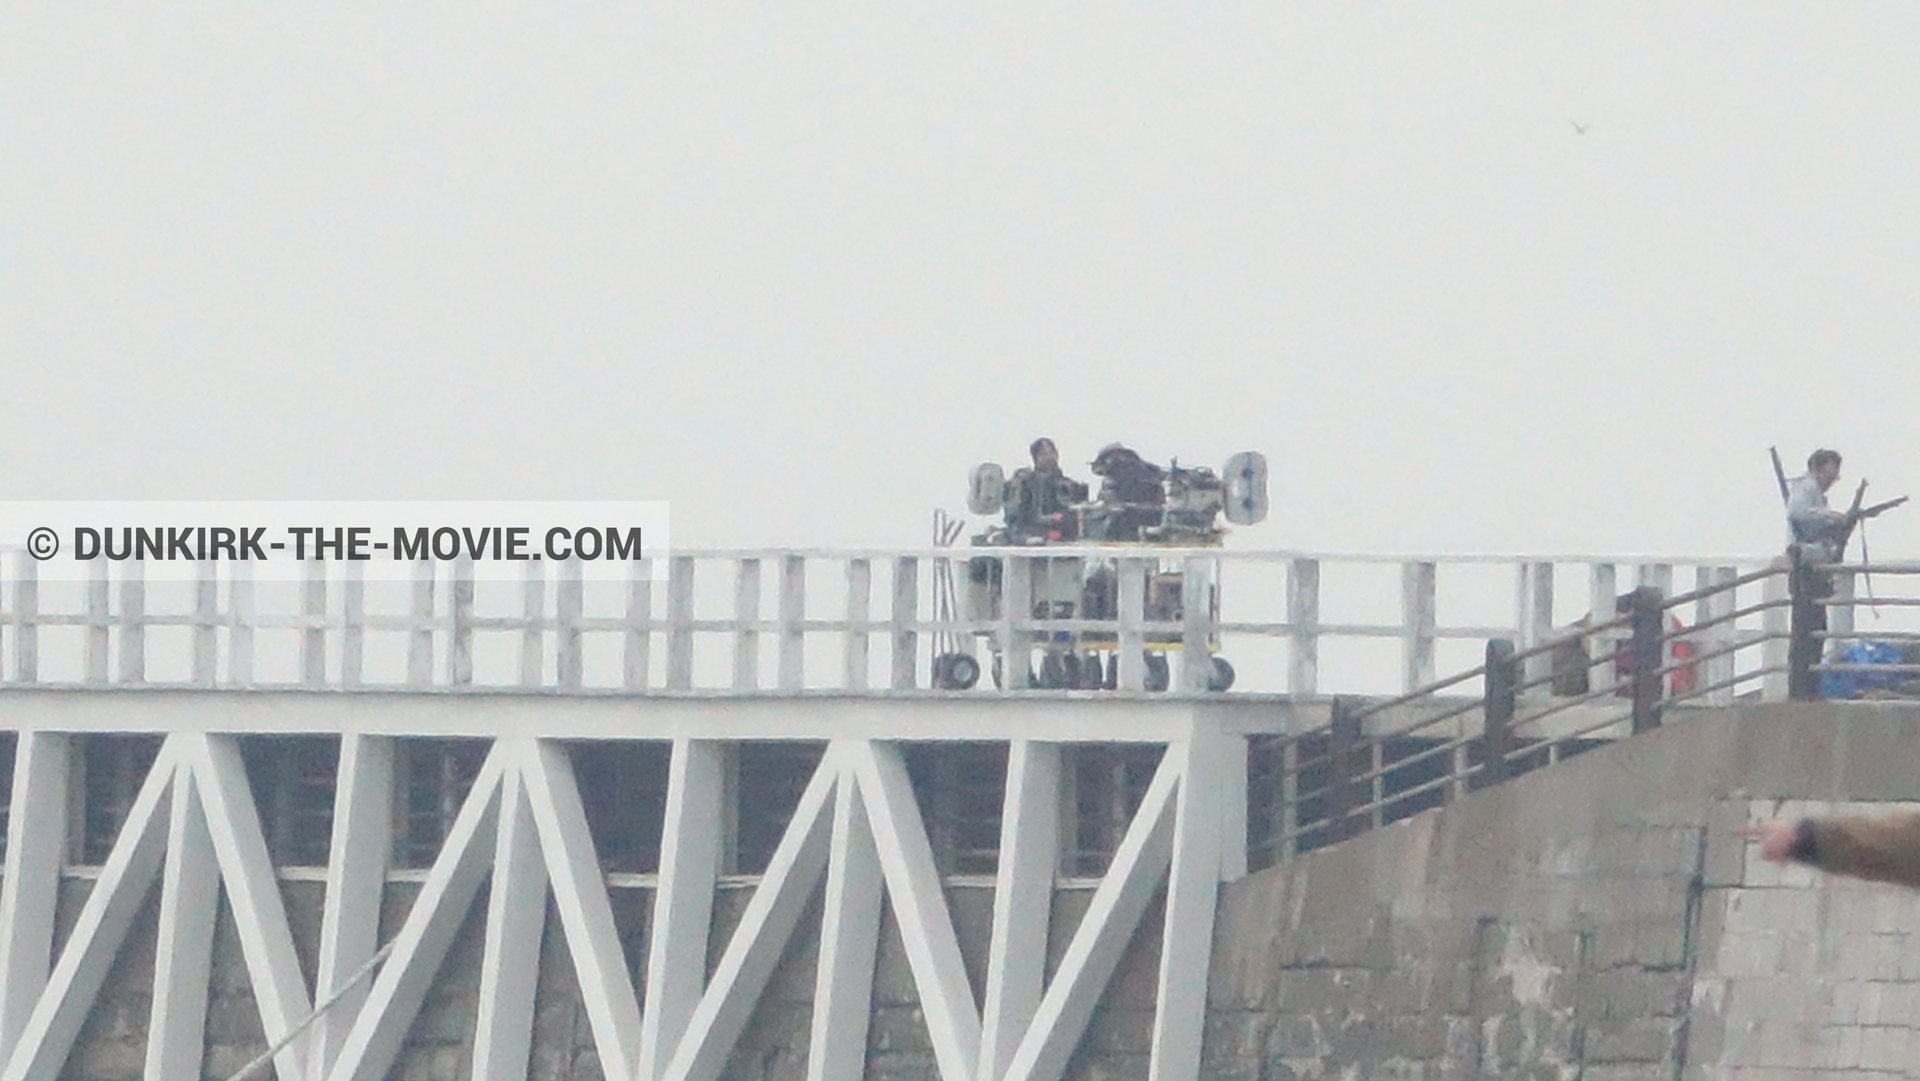 Picture with IMAX camera, grey sky, EST pier, technical team,  from behind the scene of the Dunkirk movie by Nolan